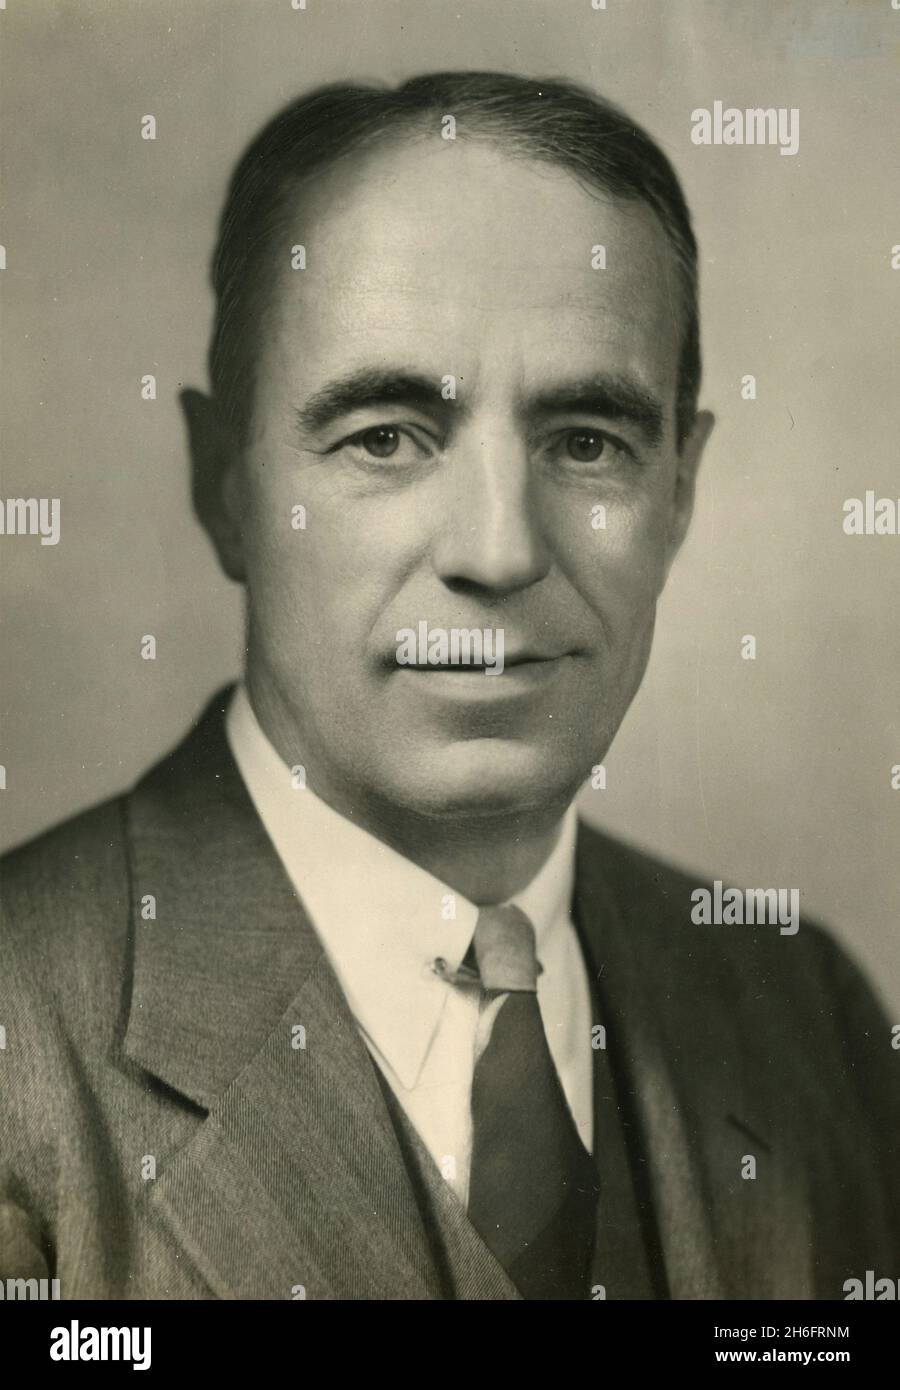 American businessman Thomas Dudley Cabot, Head of Office of Director Of International Security Affairs at US Department of State, USA 1951 Stock Photo